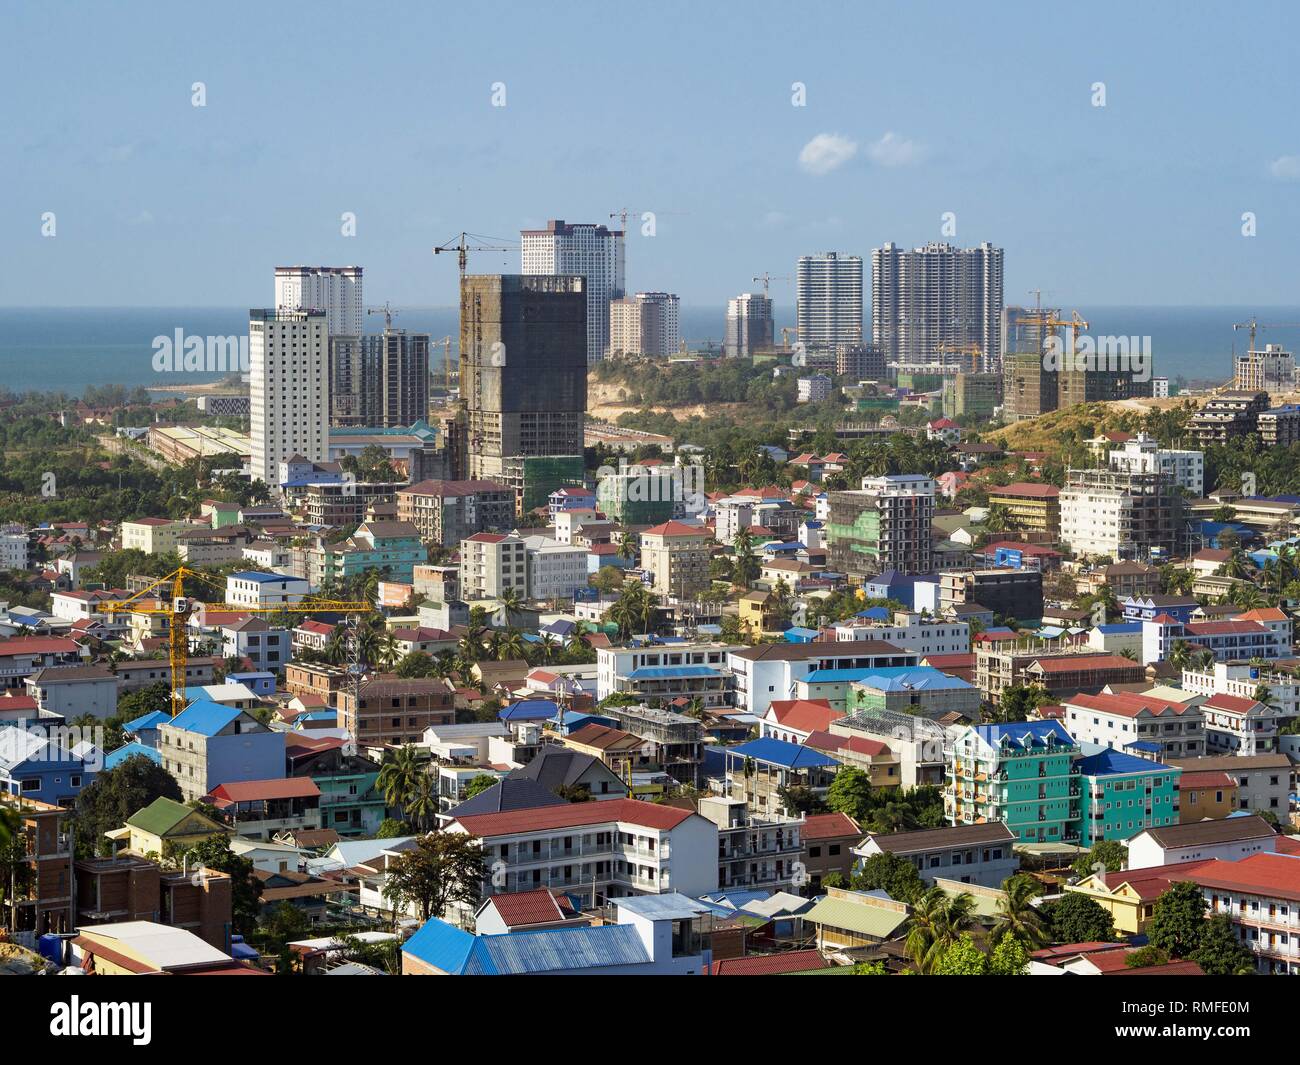 Sihanoukville, Preah Sihanouk, Cambodia. 15th Feb, 2019. Construction sites for Chinese resorts and casinos rise over downtown Sihanoukville. There are about 80 Chinese casinos and resort hotels open in Sihanoukville and dozens more under construction. The casinos are changing the city, once a sleepy port on Southeast Asia's ''backpacker trail'' into a booming city. The change is coming with a cost though. Many Cambodian residents of Sihanoukville have lost their homes to make way for the casinos and the jobs are going to Chinese workers, brought in to build casinos and work in the casin Stock Photo